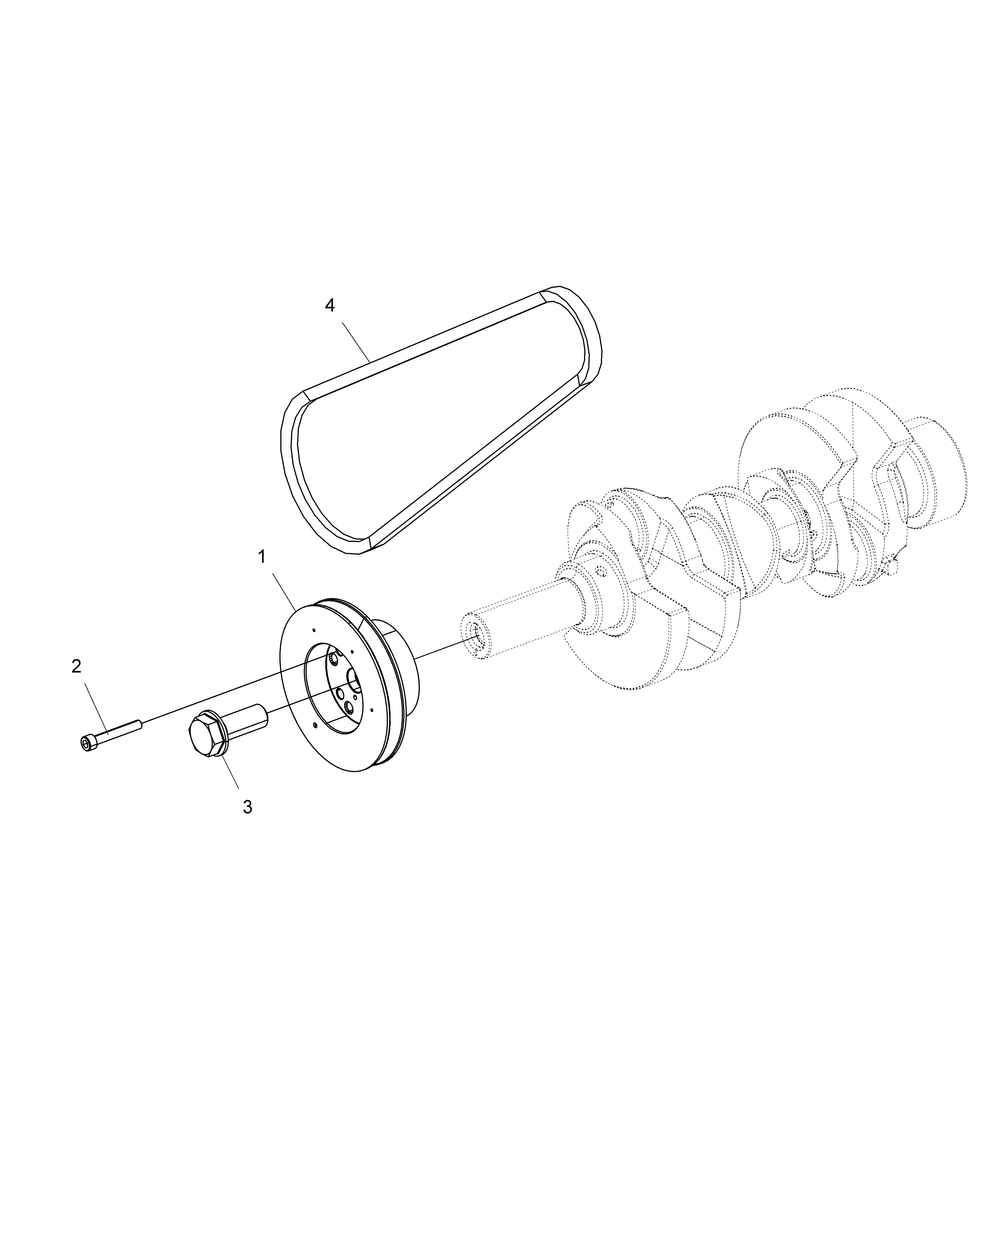 Engine drive pulley and drive belt - r151dpd1aa_2d